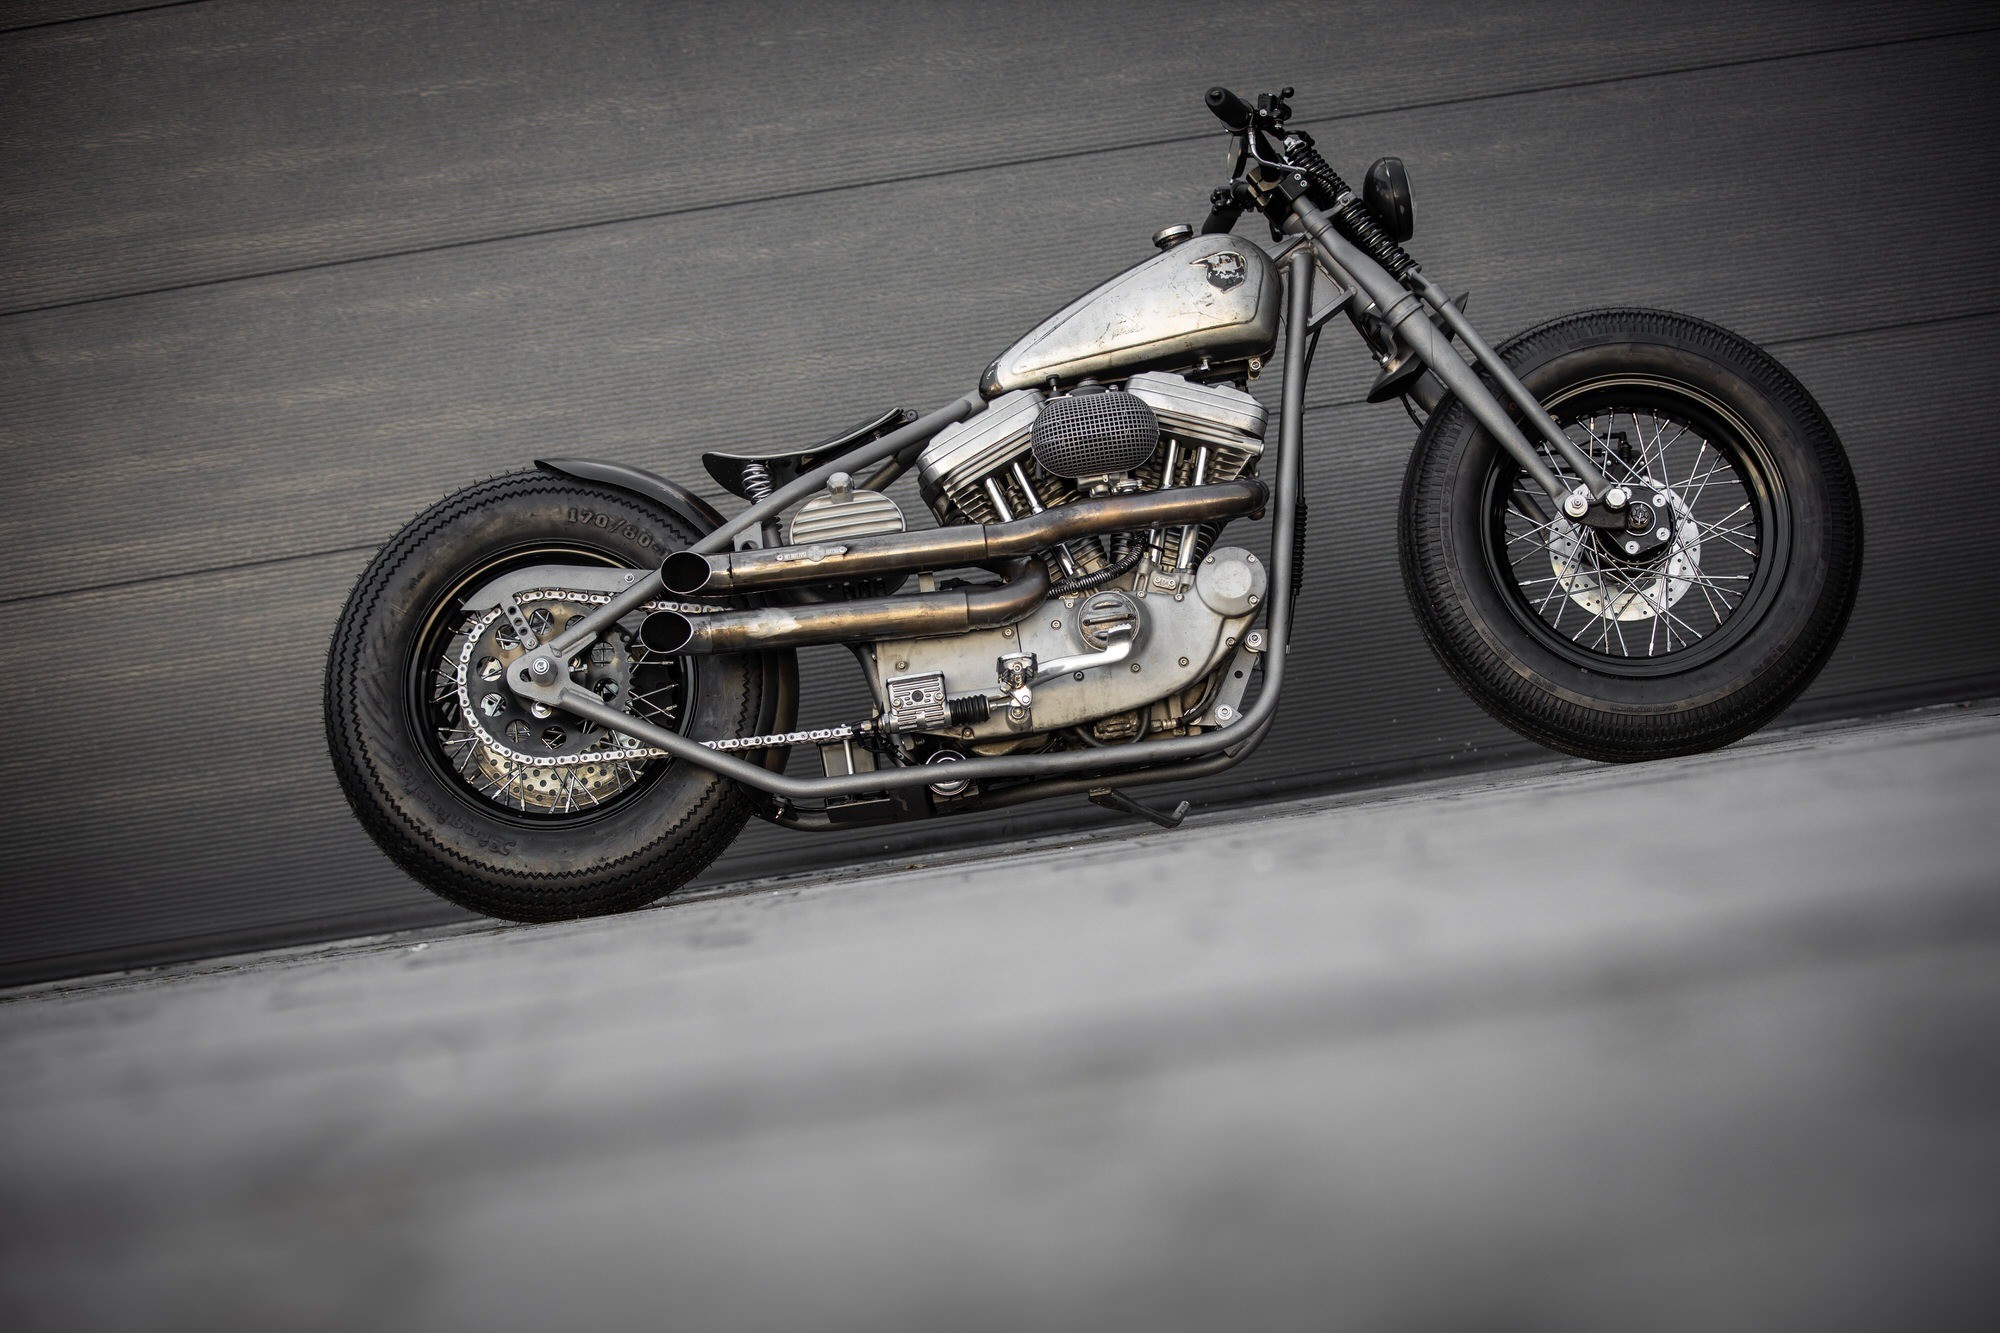 Say Hello to Sirko Sporty, a Custom Hardtail Bobber With Old-School ...